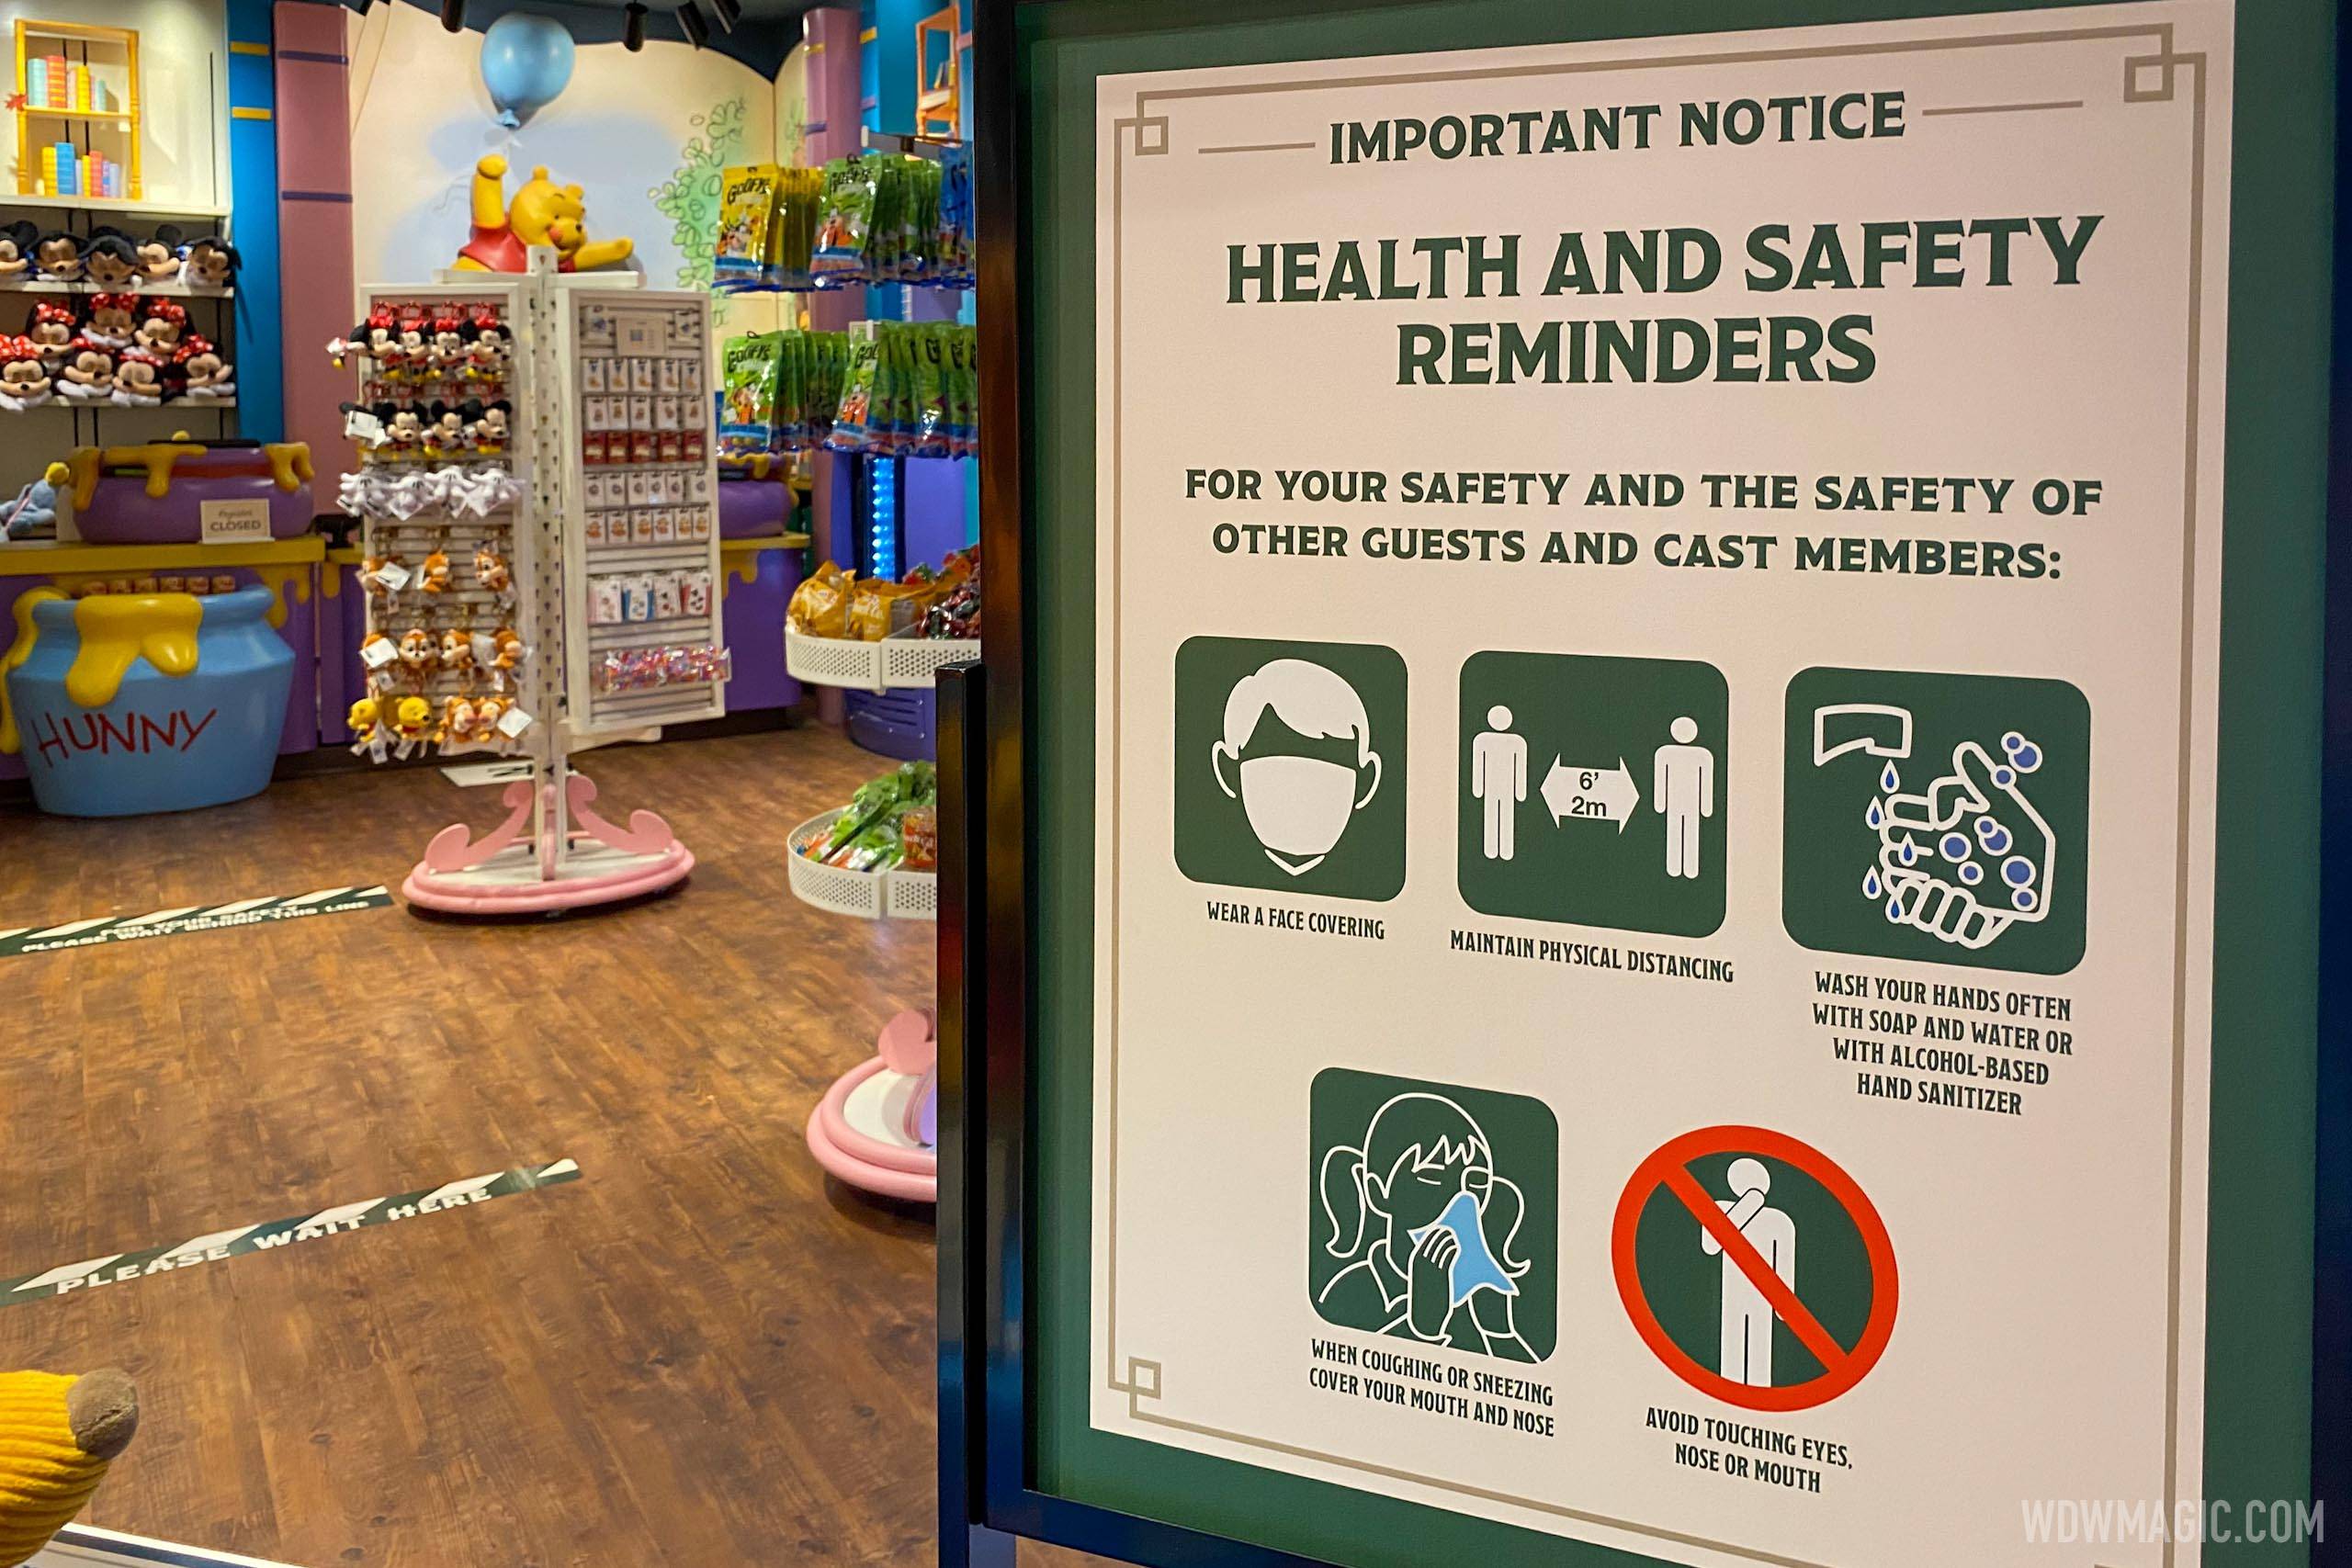 6ft of distancing will remain at Disney World's stores